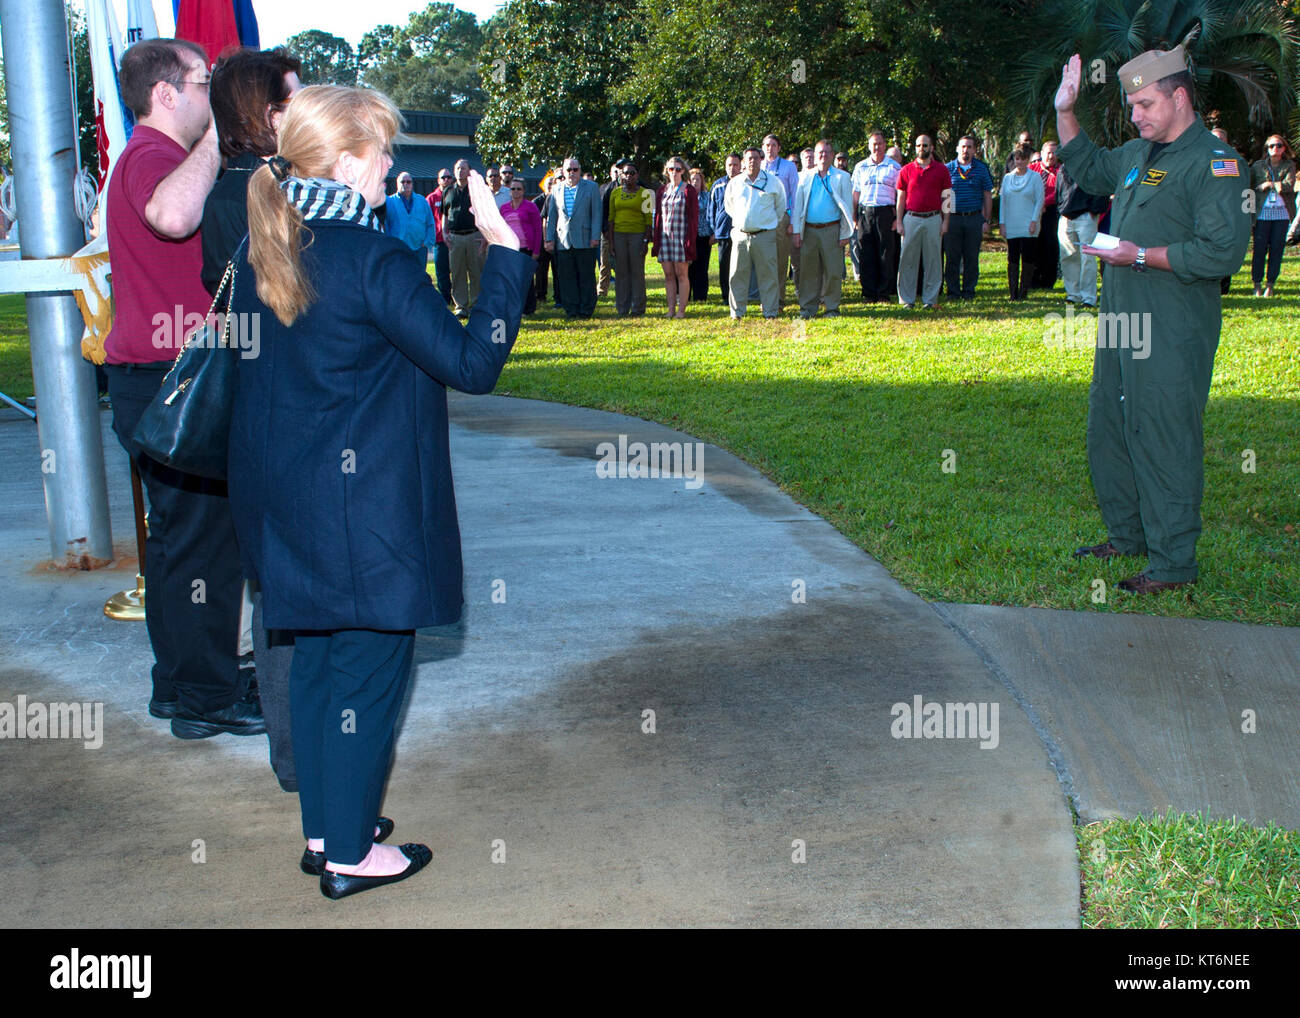 PANAMA CITY, Florida - Naval Surface Warfare Center Panama City Division Executive Officer recites administers the oath of office to a group of newly hired federal civil servants around the command flagpole at the Veterans Day Celebration Nov. 13, 2017. U.S. Navy Stock Photo